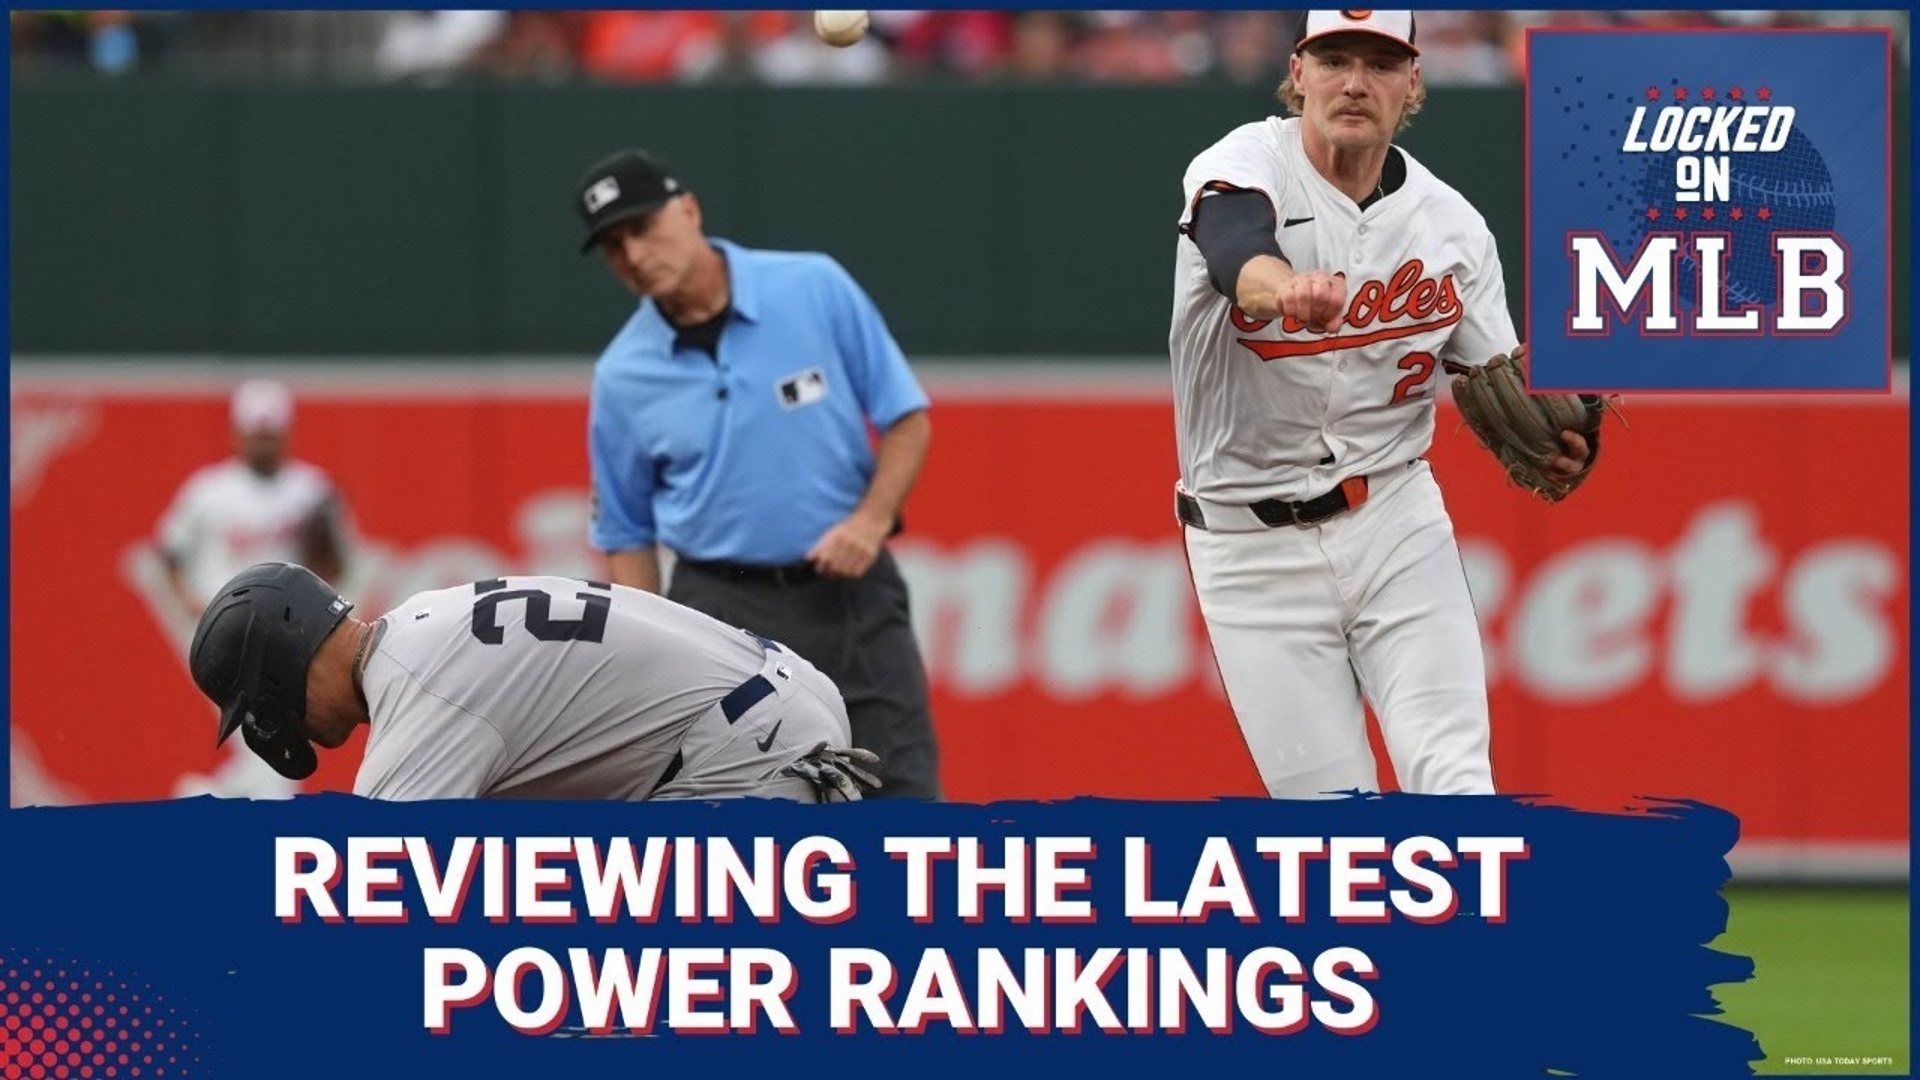 It is Power Ranking Day!

What teams have slipped? What teams are surging?